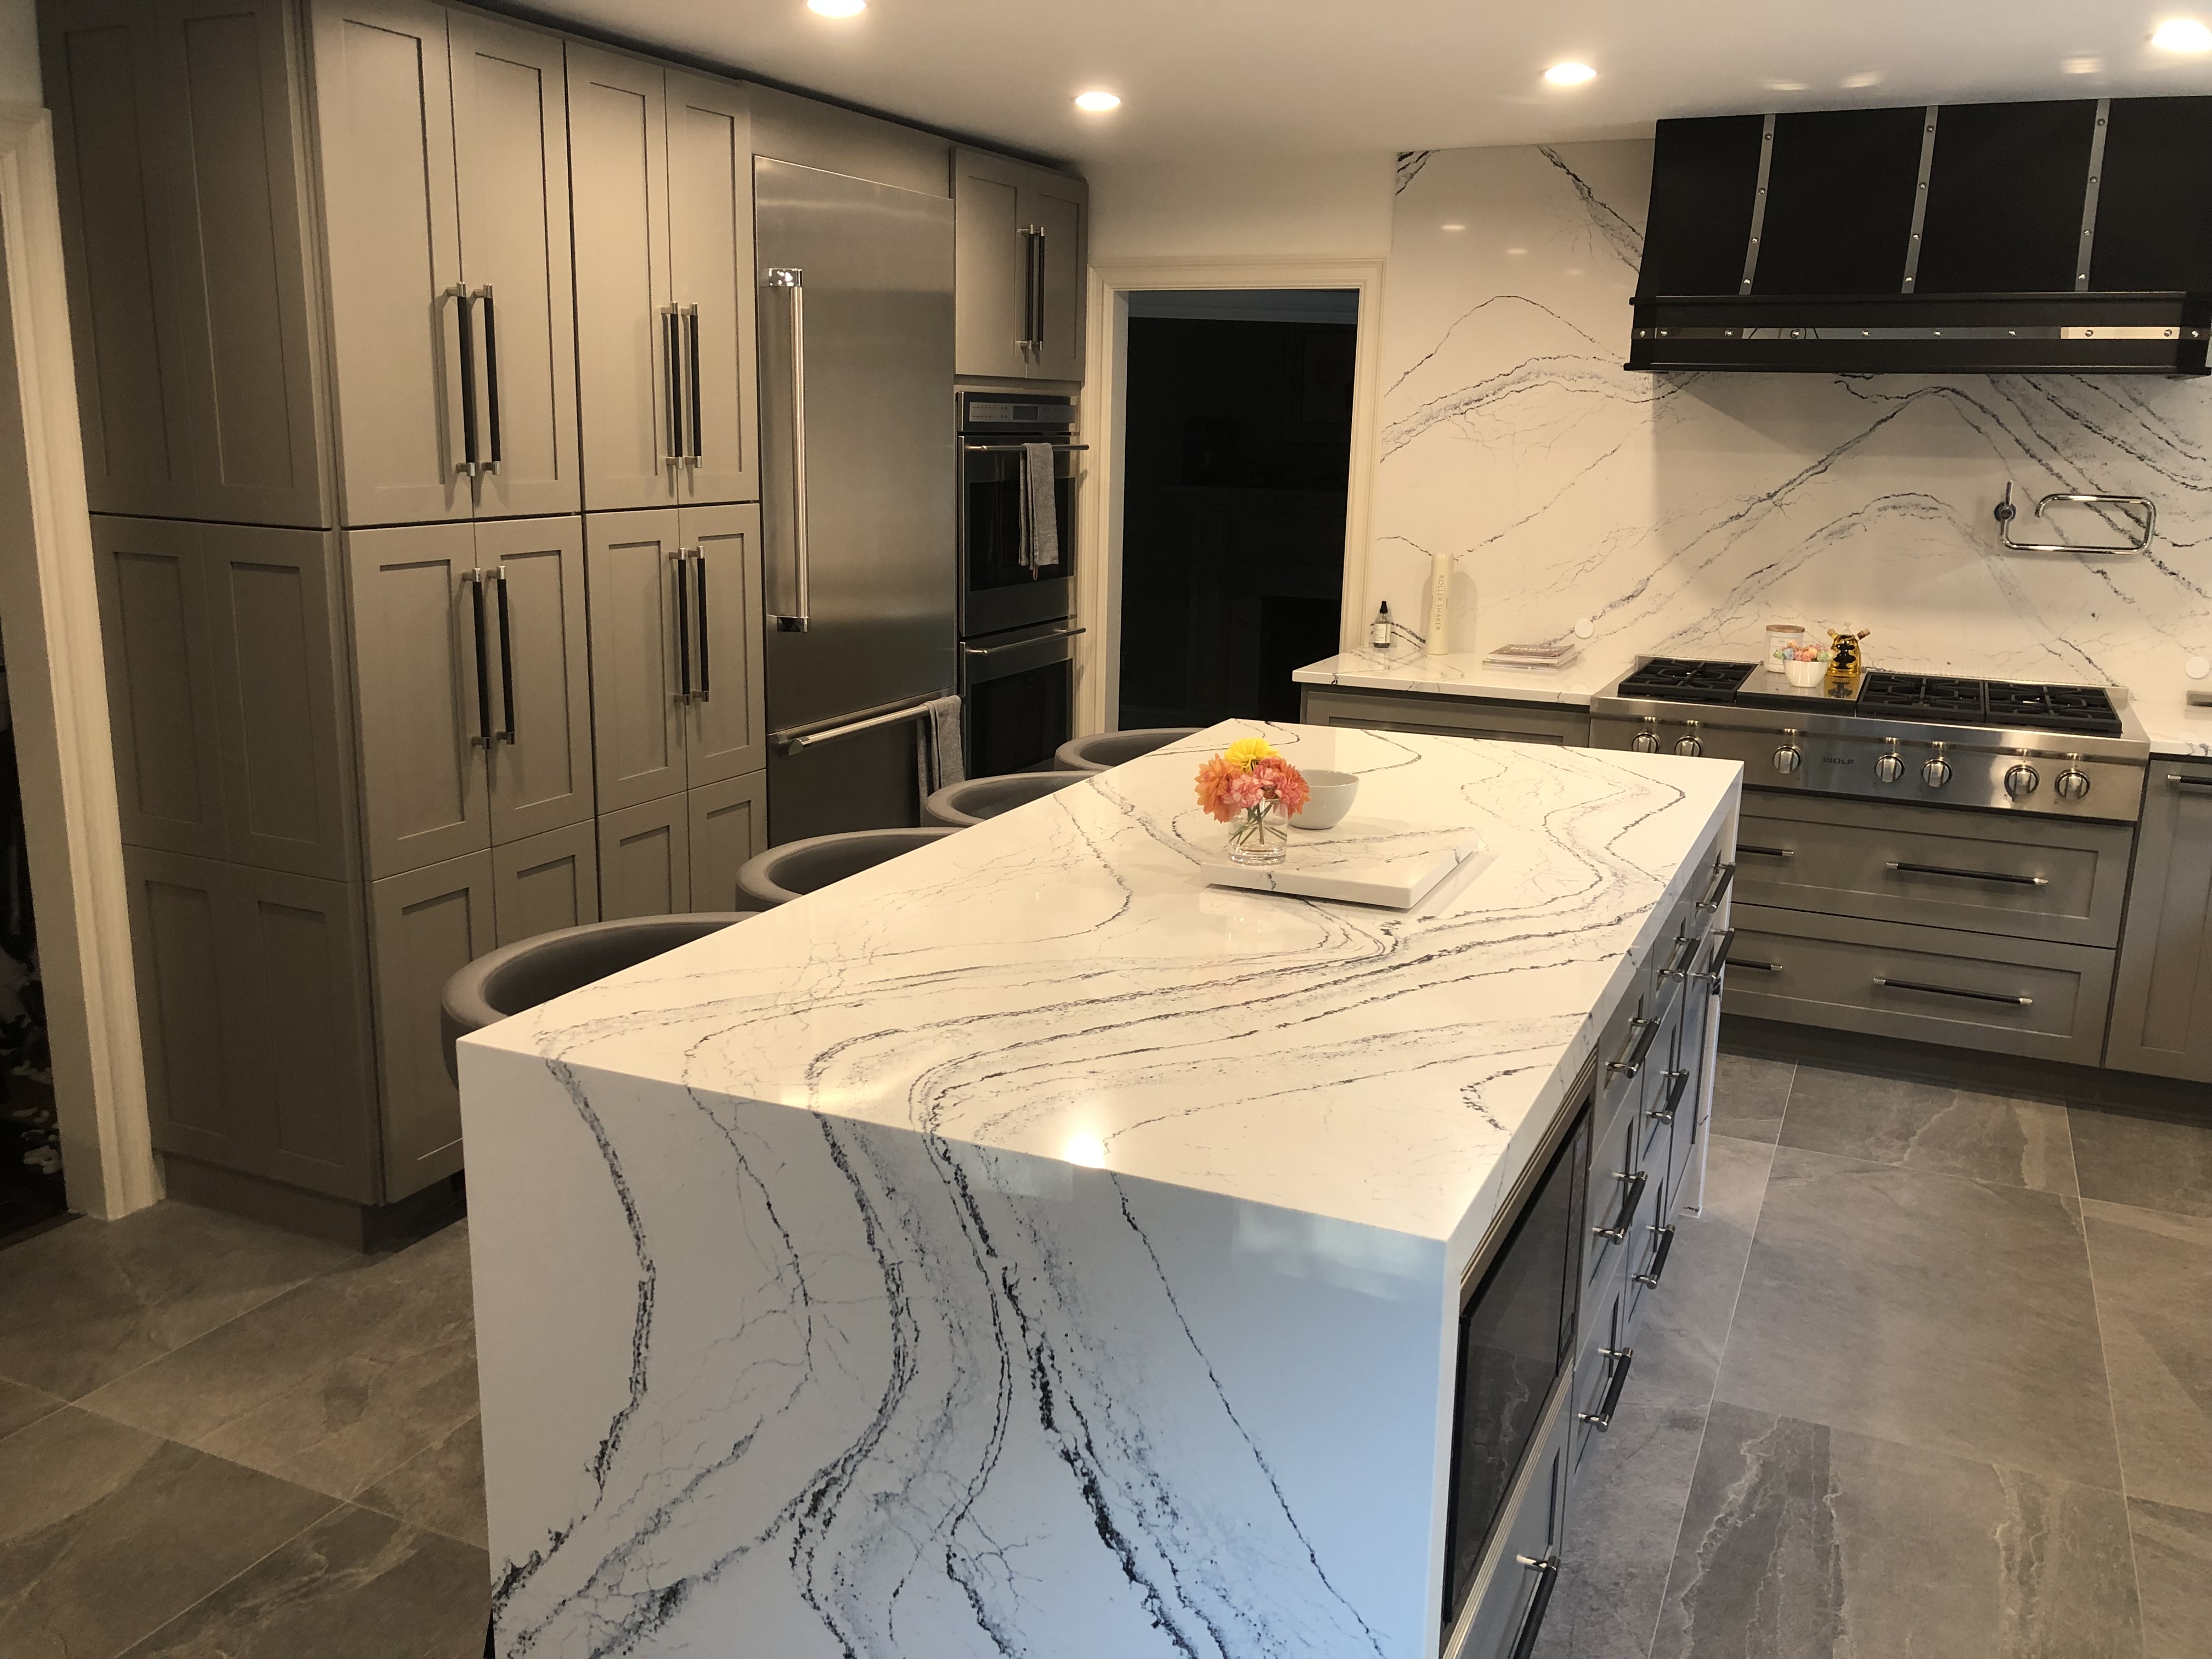 French kitchen design with white kitchen cabinets, exquisite marble kitchen countertops, and marble backsplash, while discovering inspiring kitchen table idea